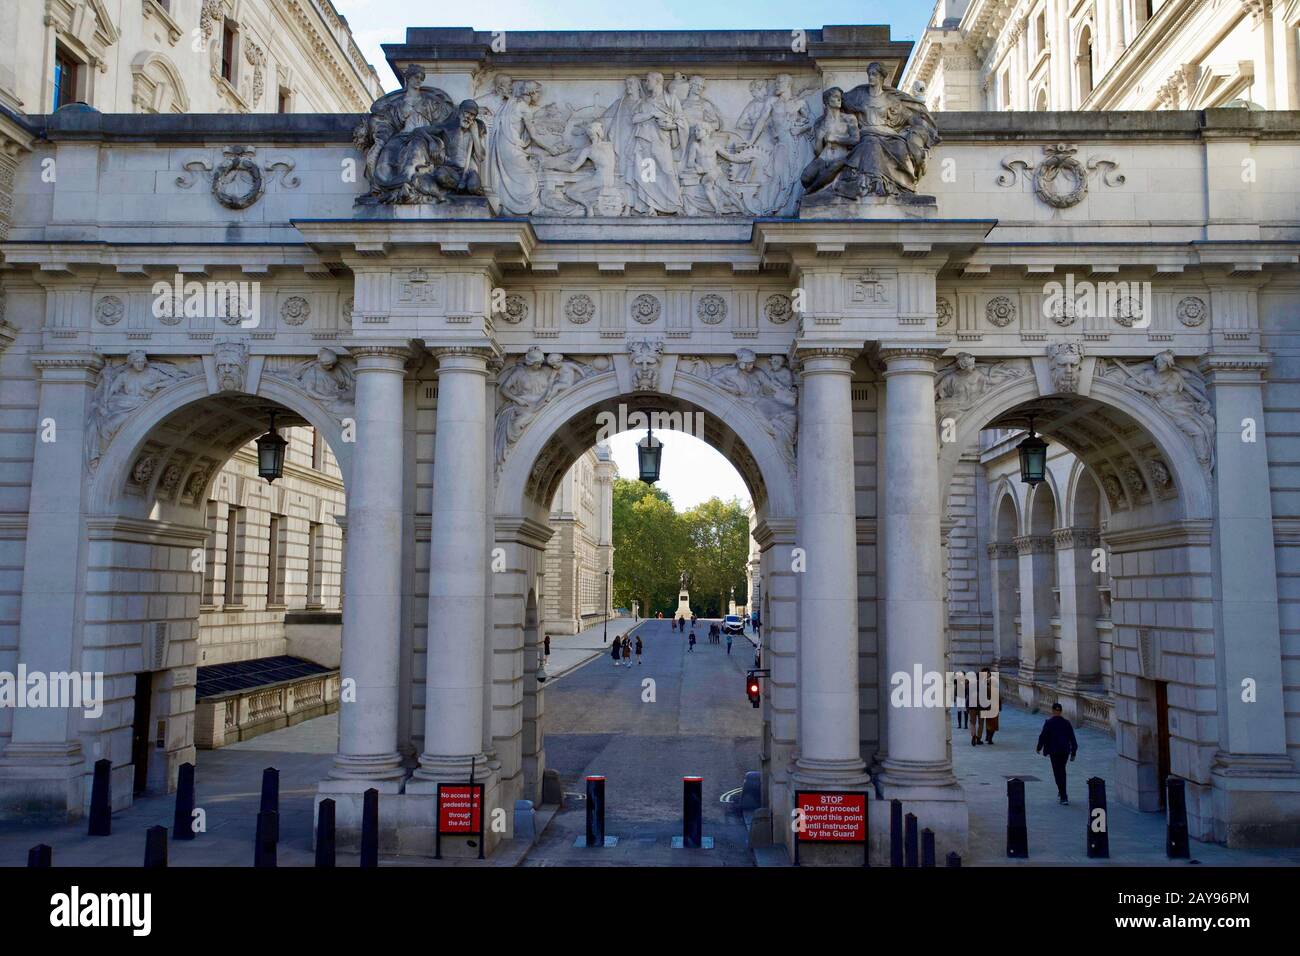 King Charles Street Arch, Whitehall, City of Westminster, London, England. Stock Photo